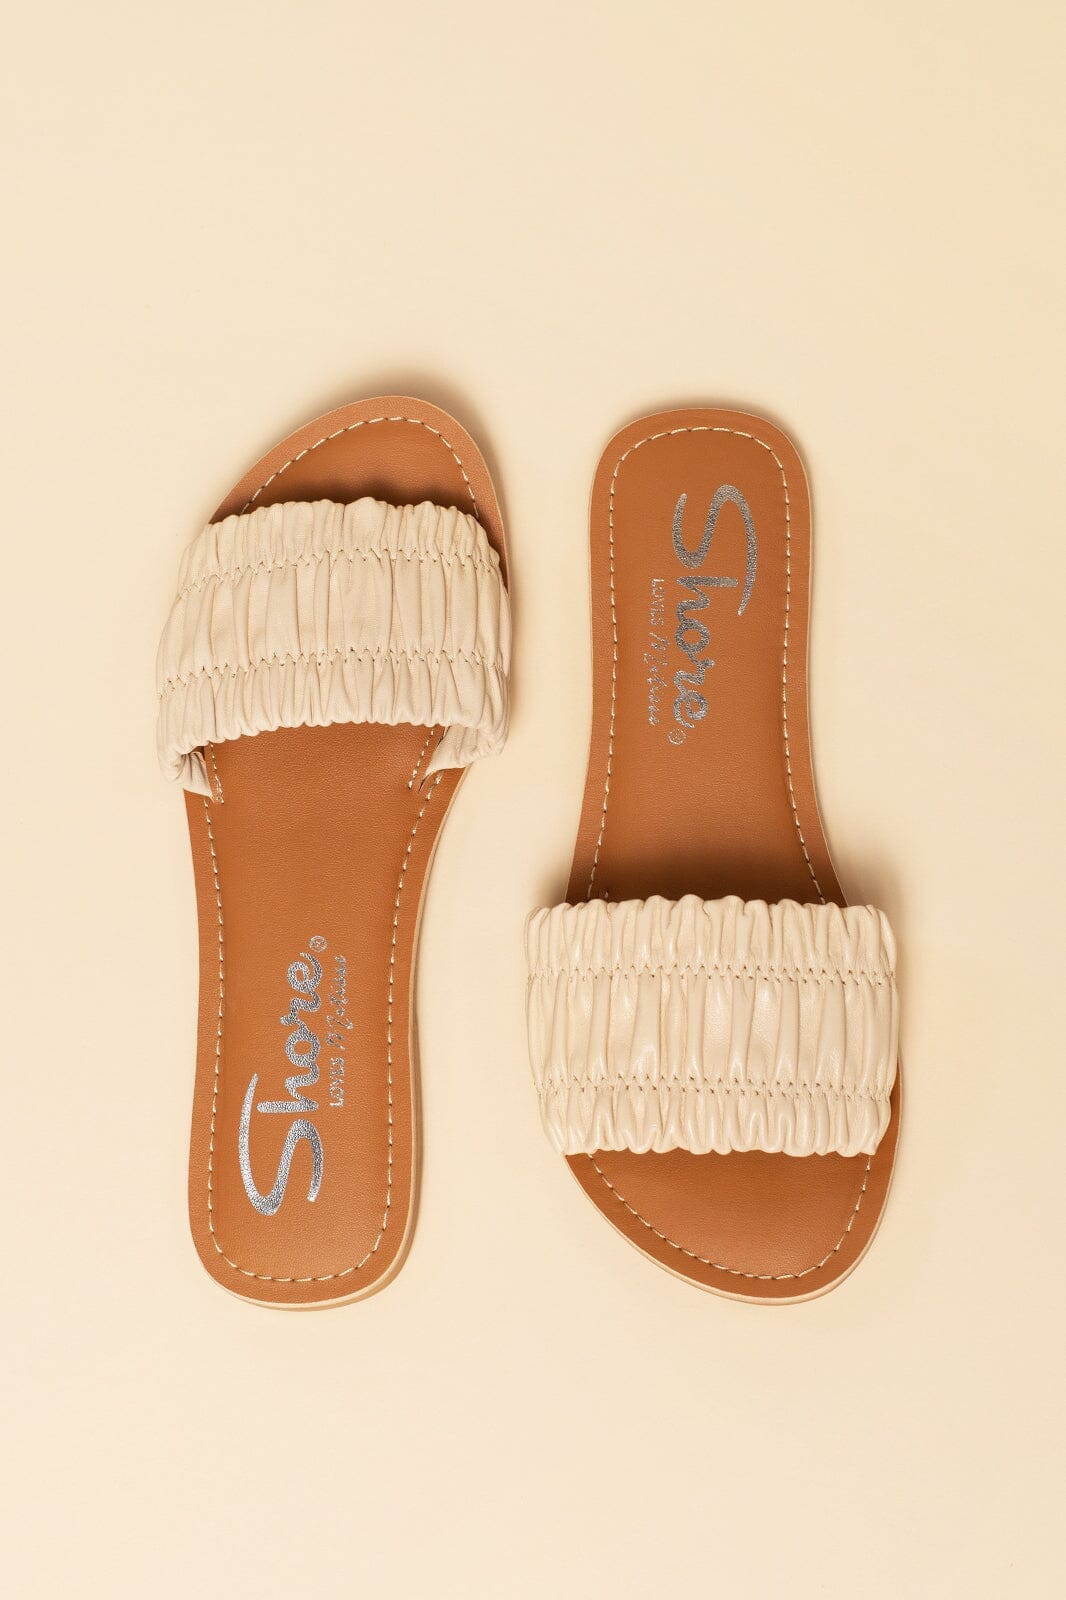 Channel Sandal Ivory White By Shore